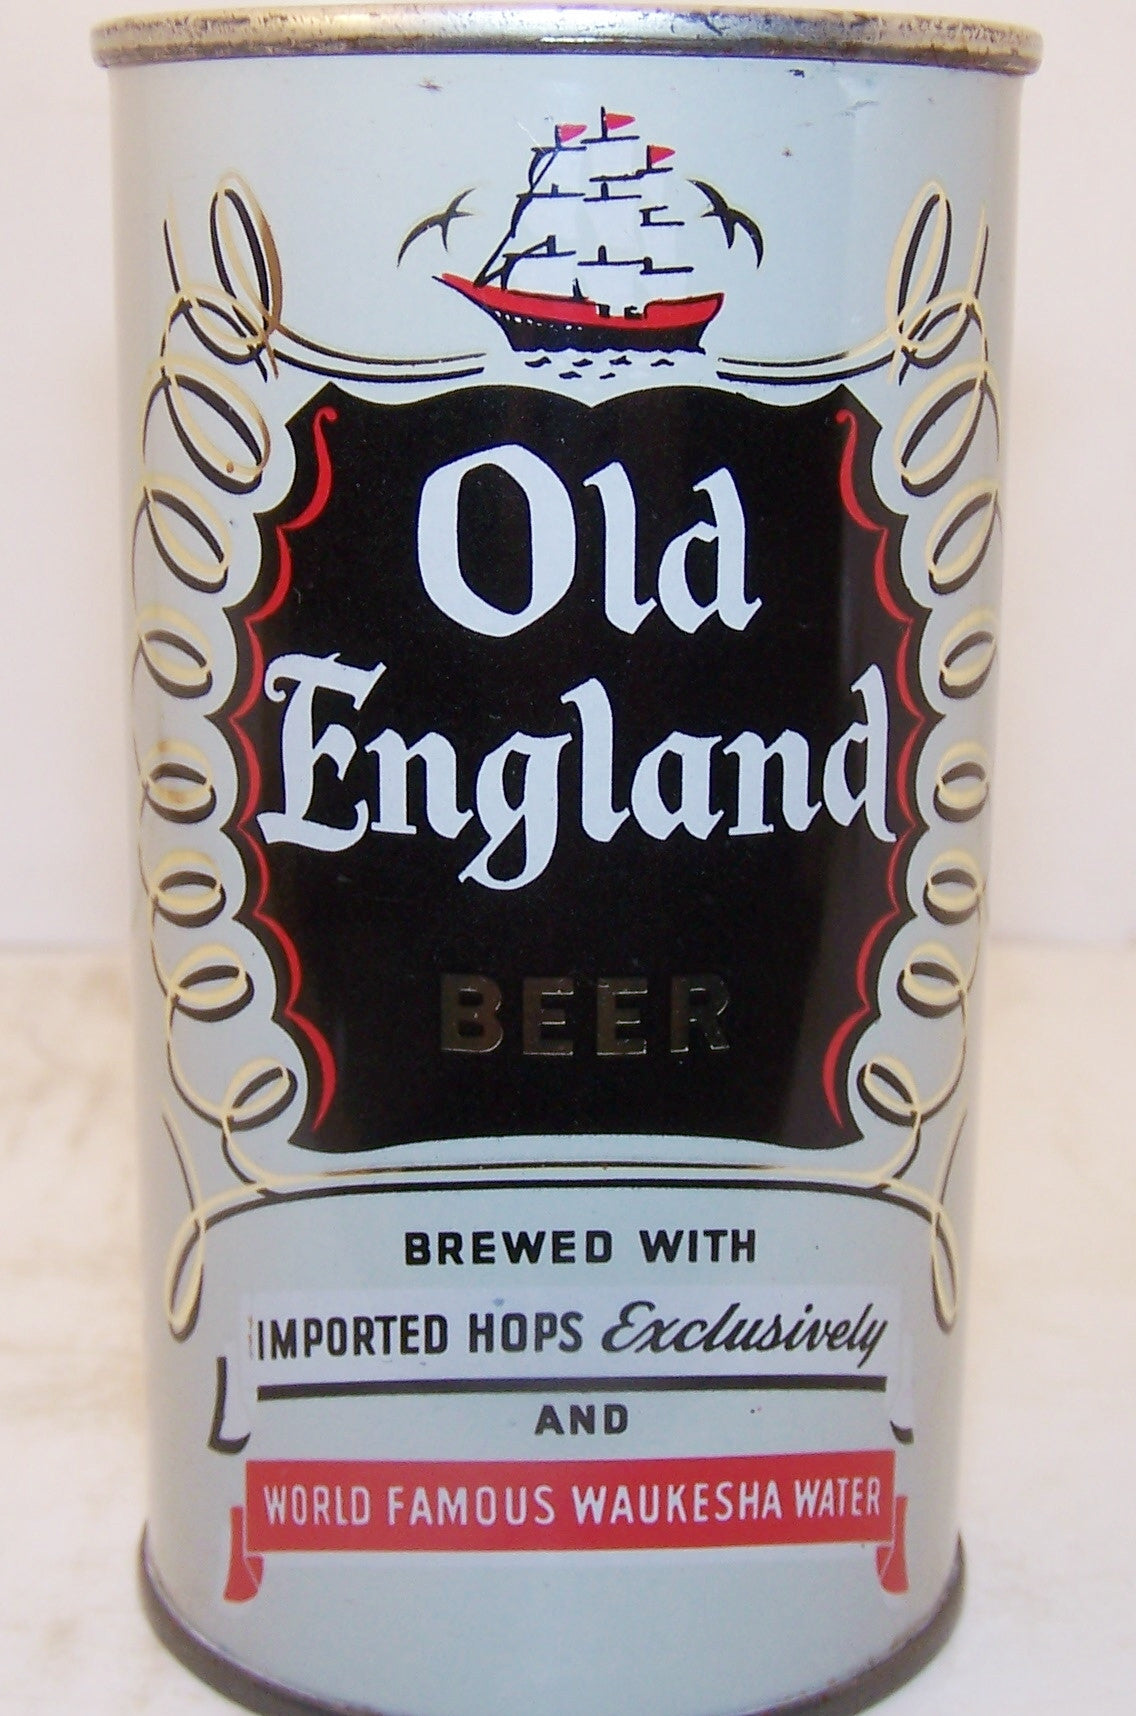 Old England Beer, USBC 106-9, Grade A1+ Sold on 4/6/15